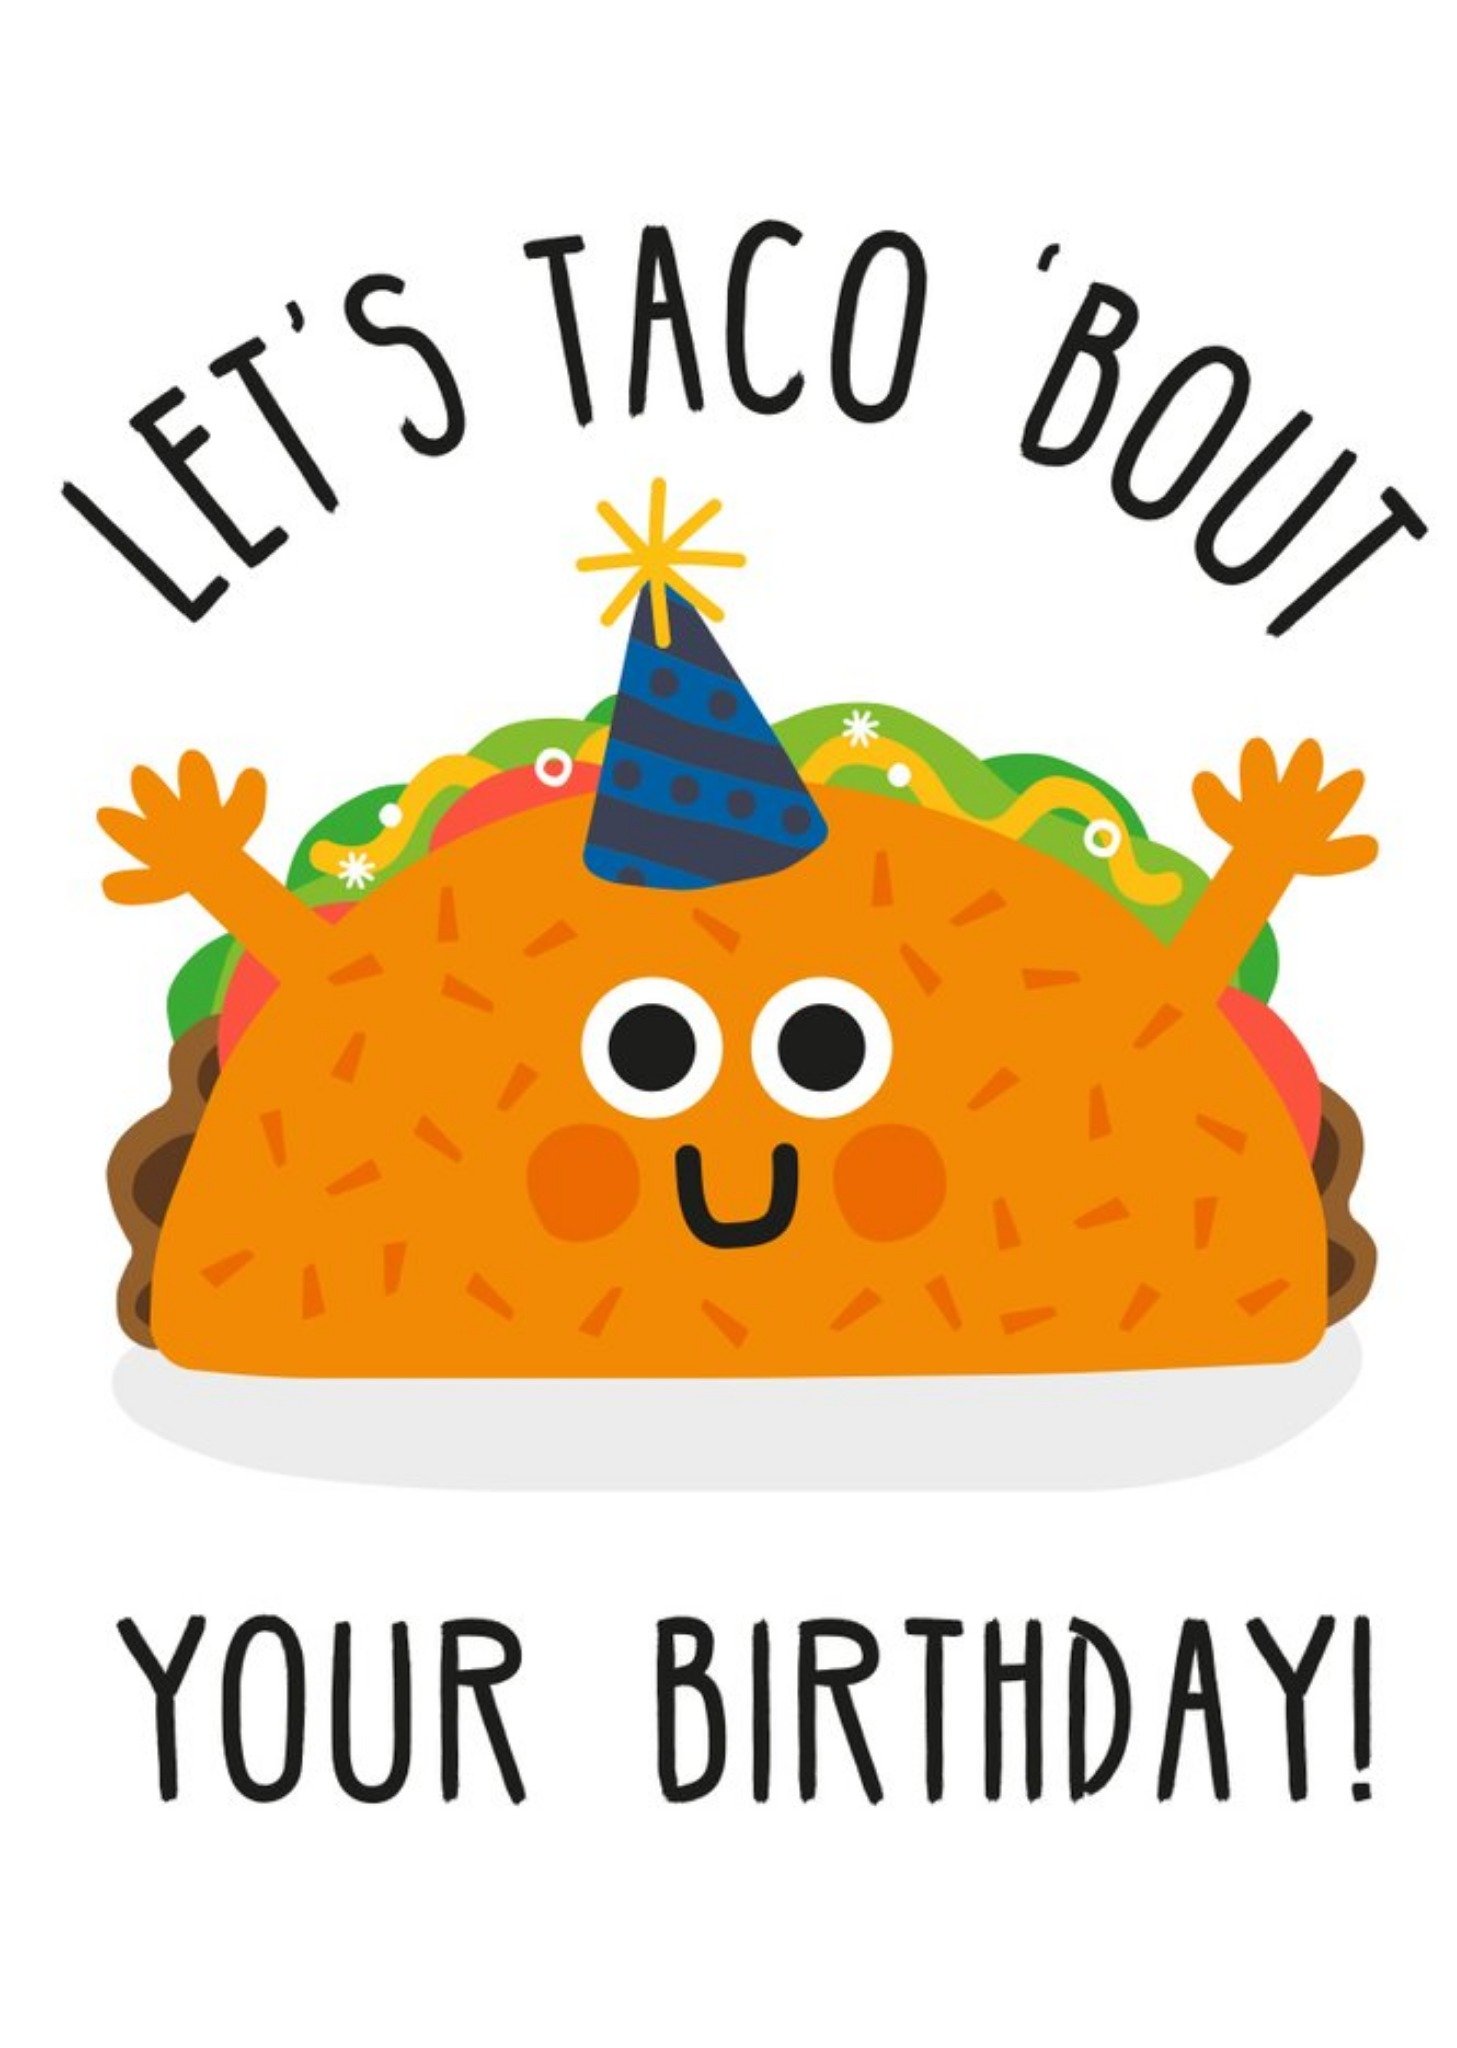 Moonpig Illustration Of A Cute Taco Let's Taco Bout Your Birthday Funny Pun Card Ecard